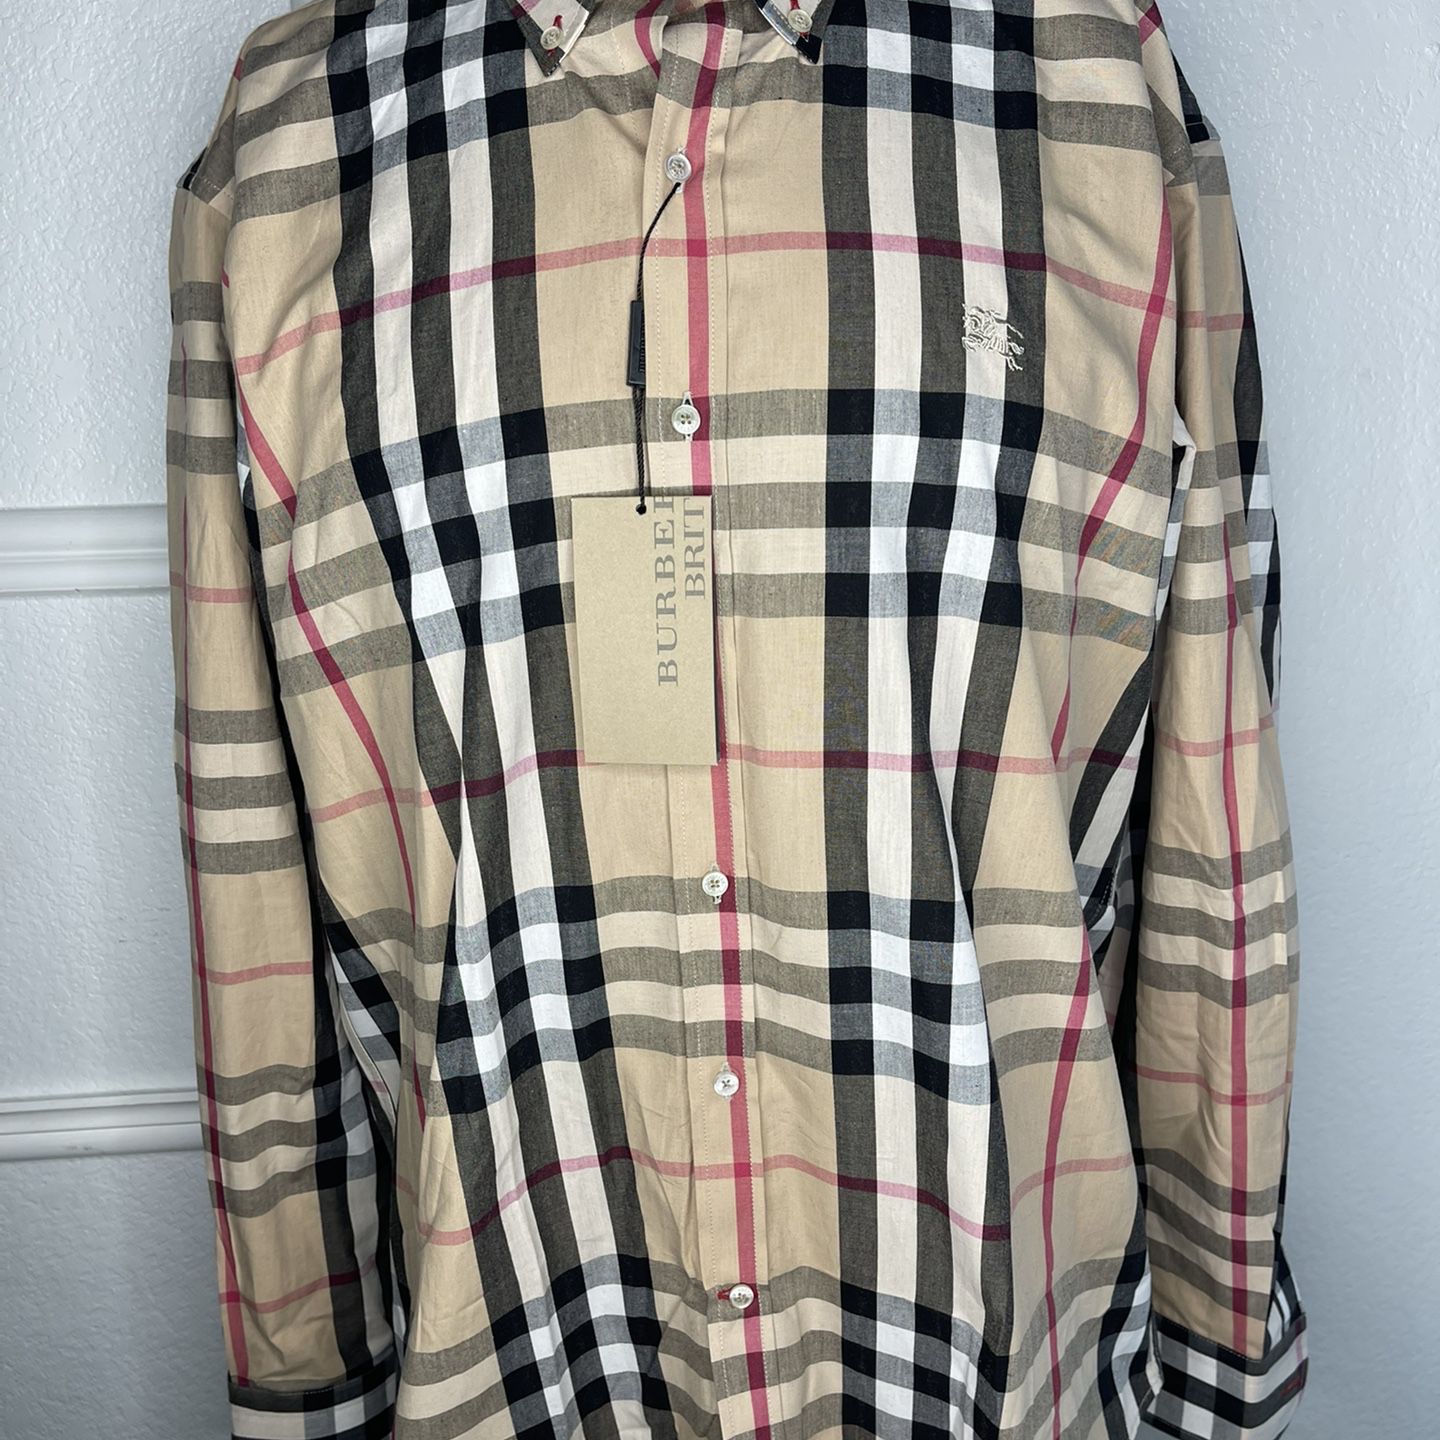 Burberry Shirt for Sale in Los Angeles, CA - OfferUp